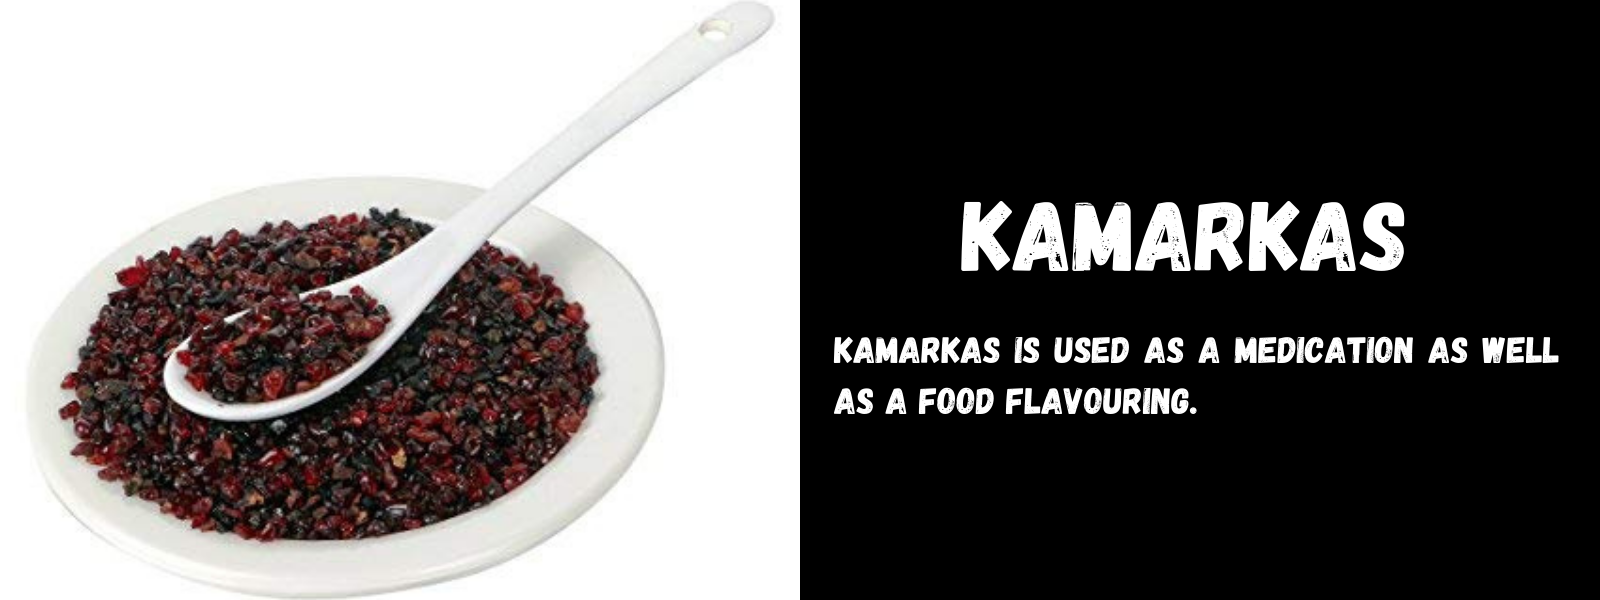 Kamarkas - Health Benefits, Uses and Important Facts